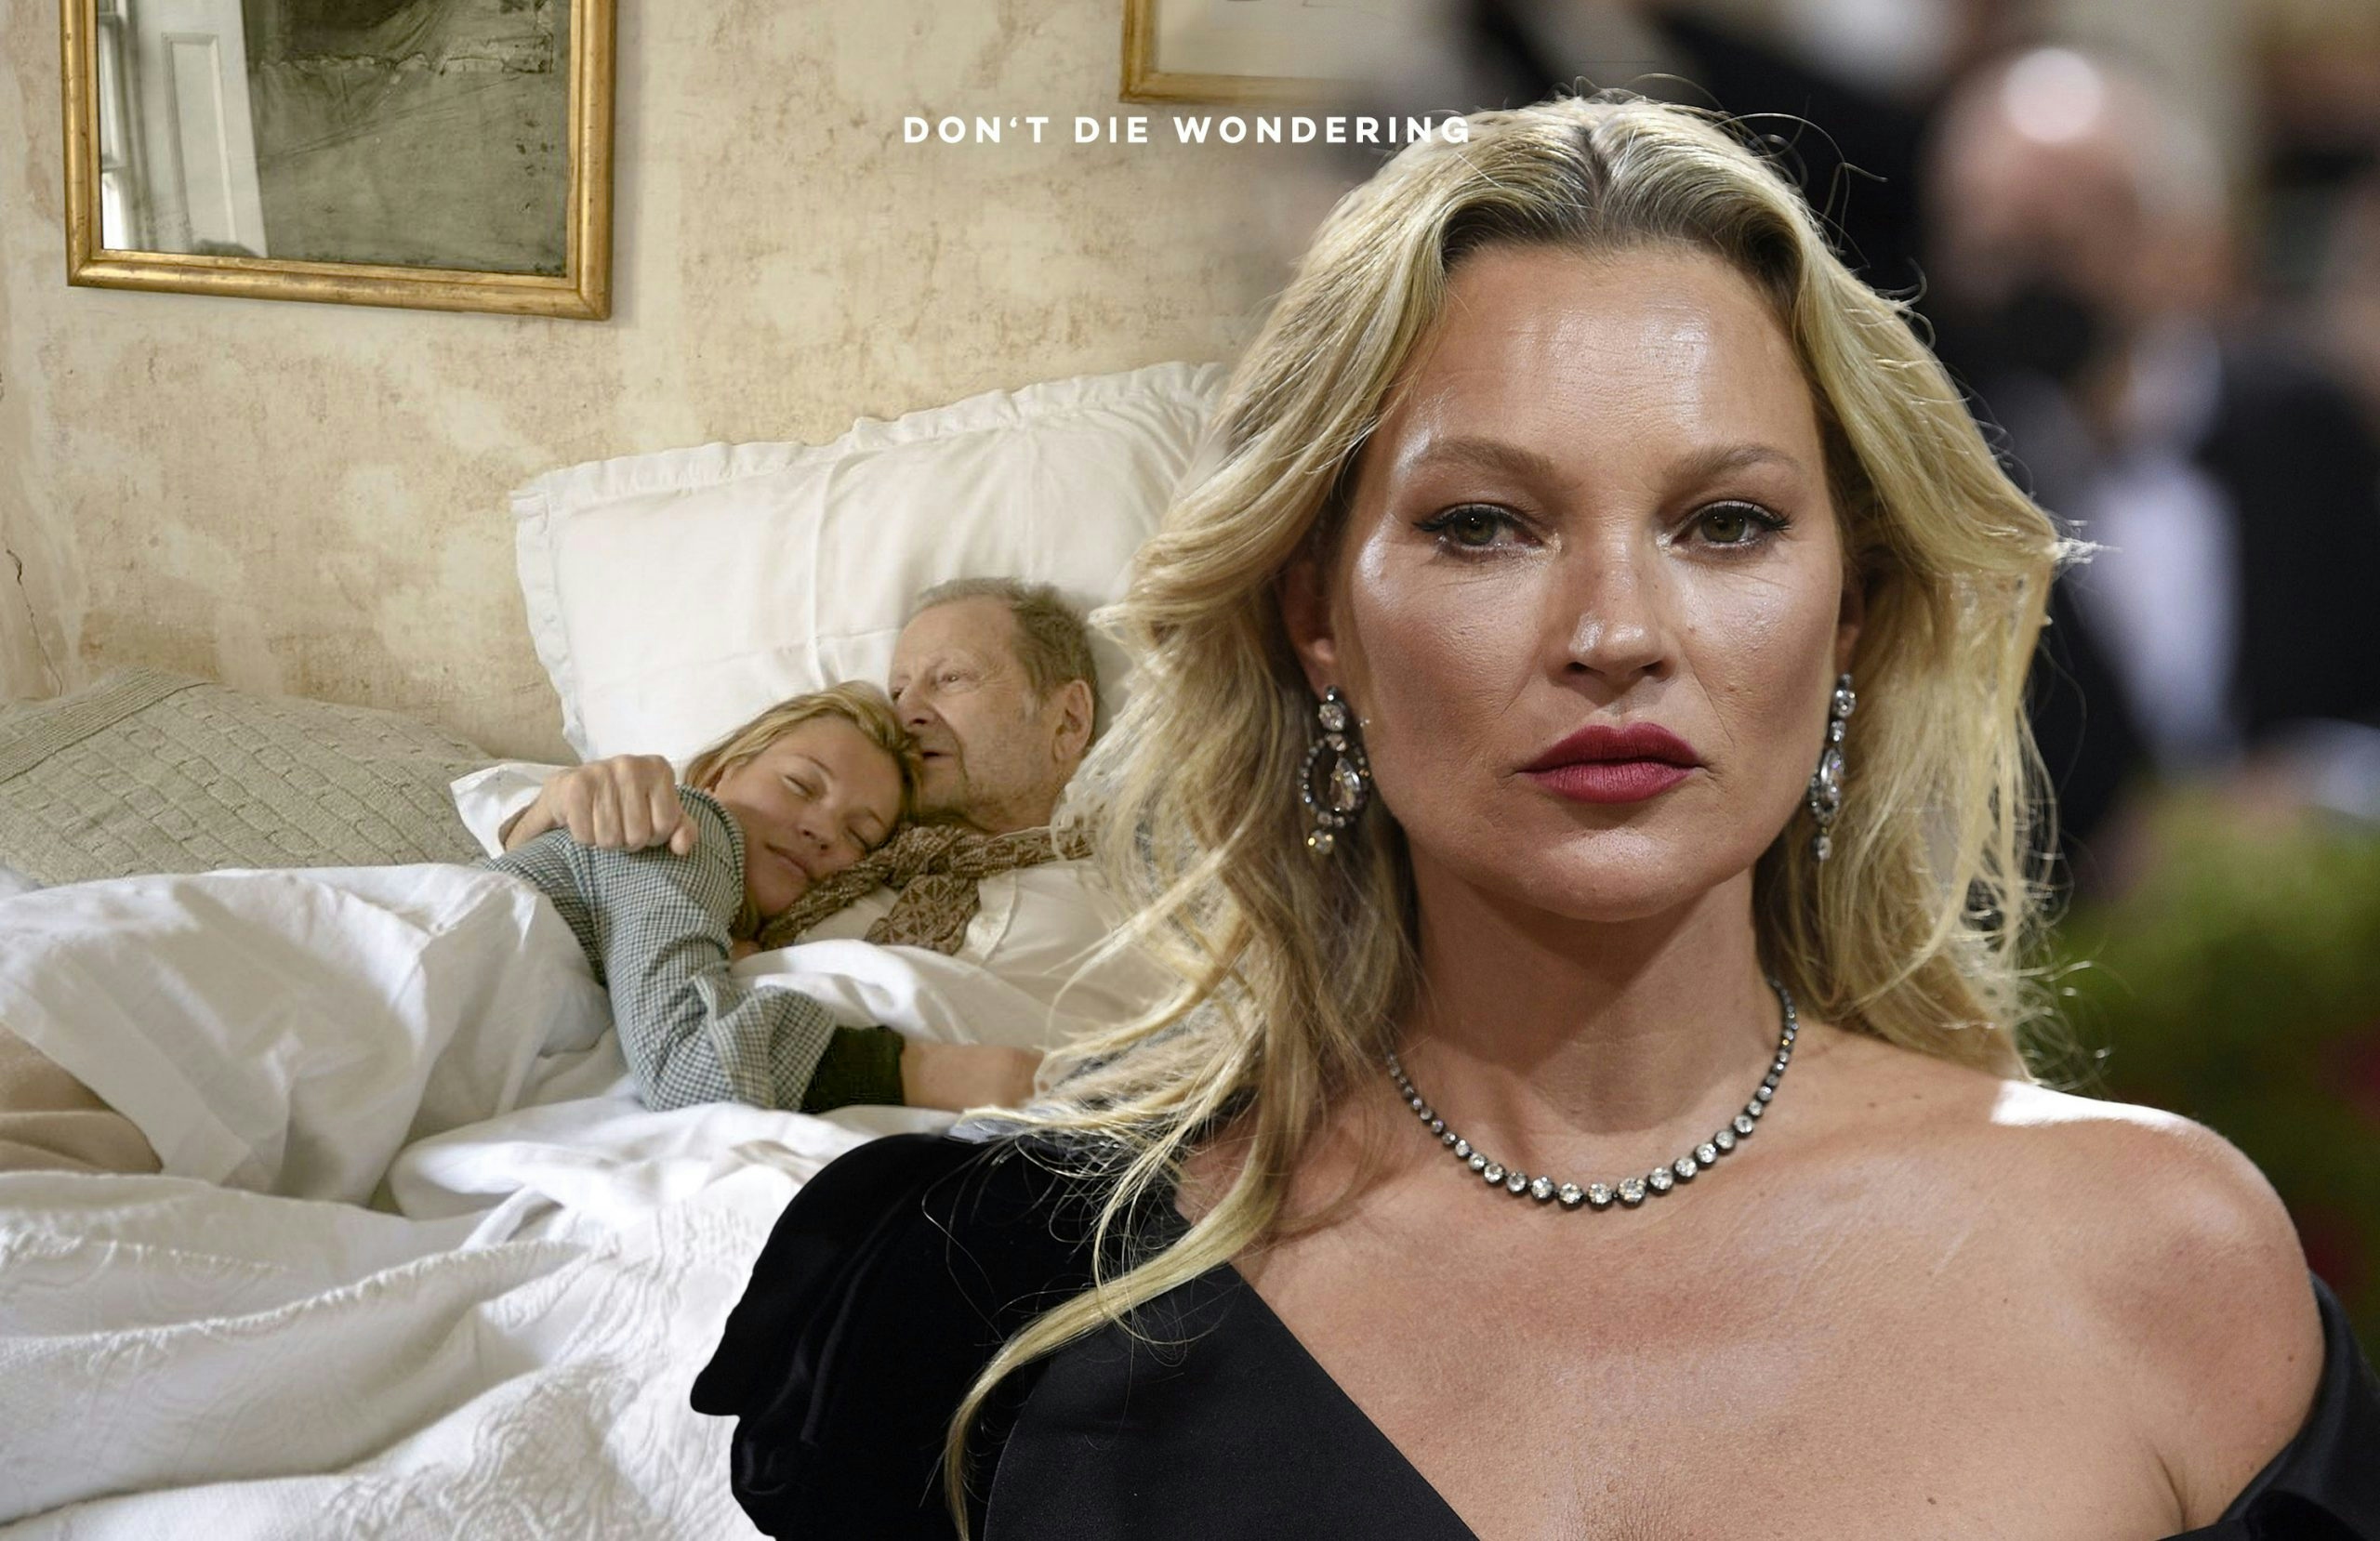 Moss And Freud: A Kate Moss Biopic Tracing Her Love Story With Lucian Freud